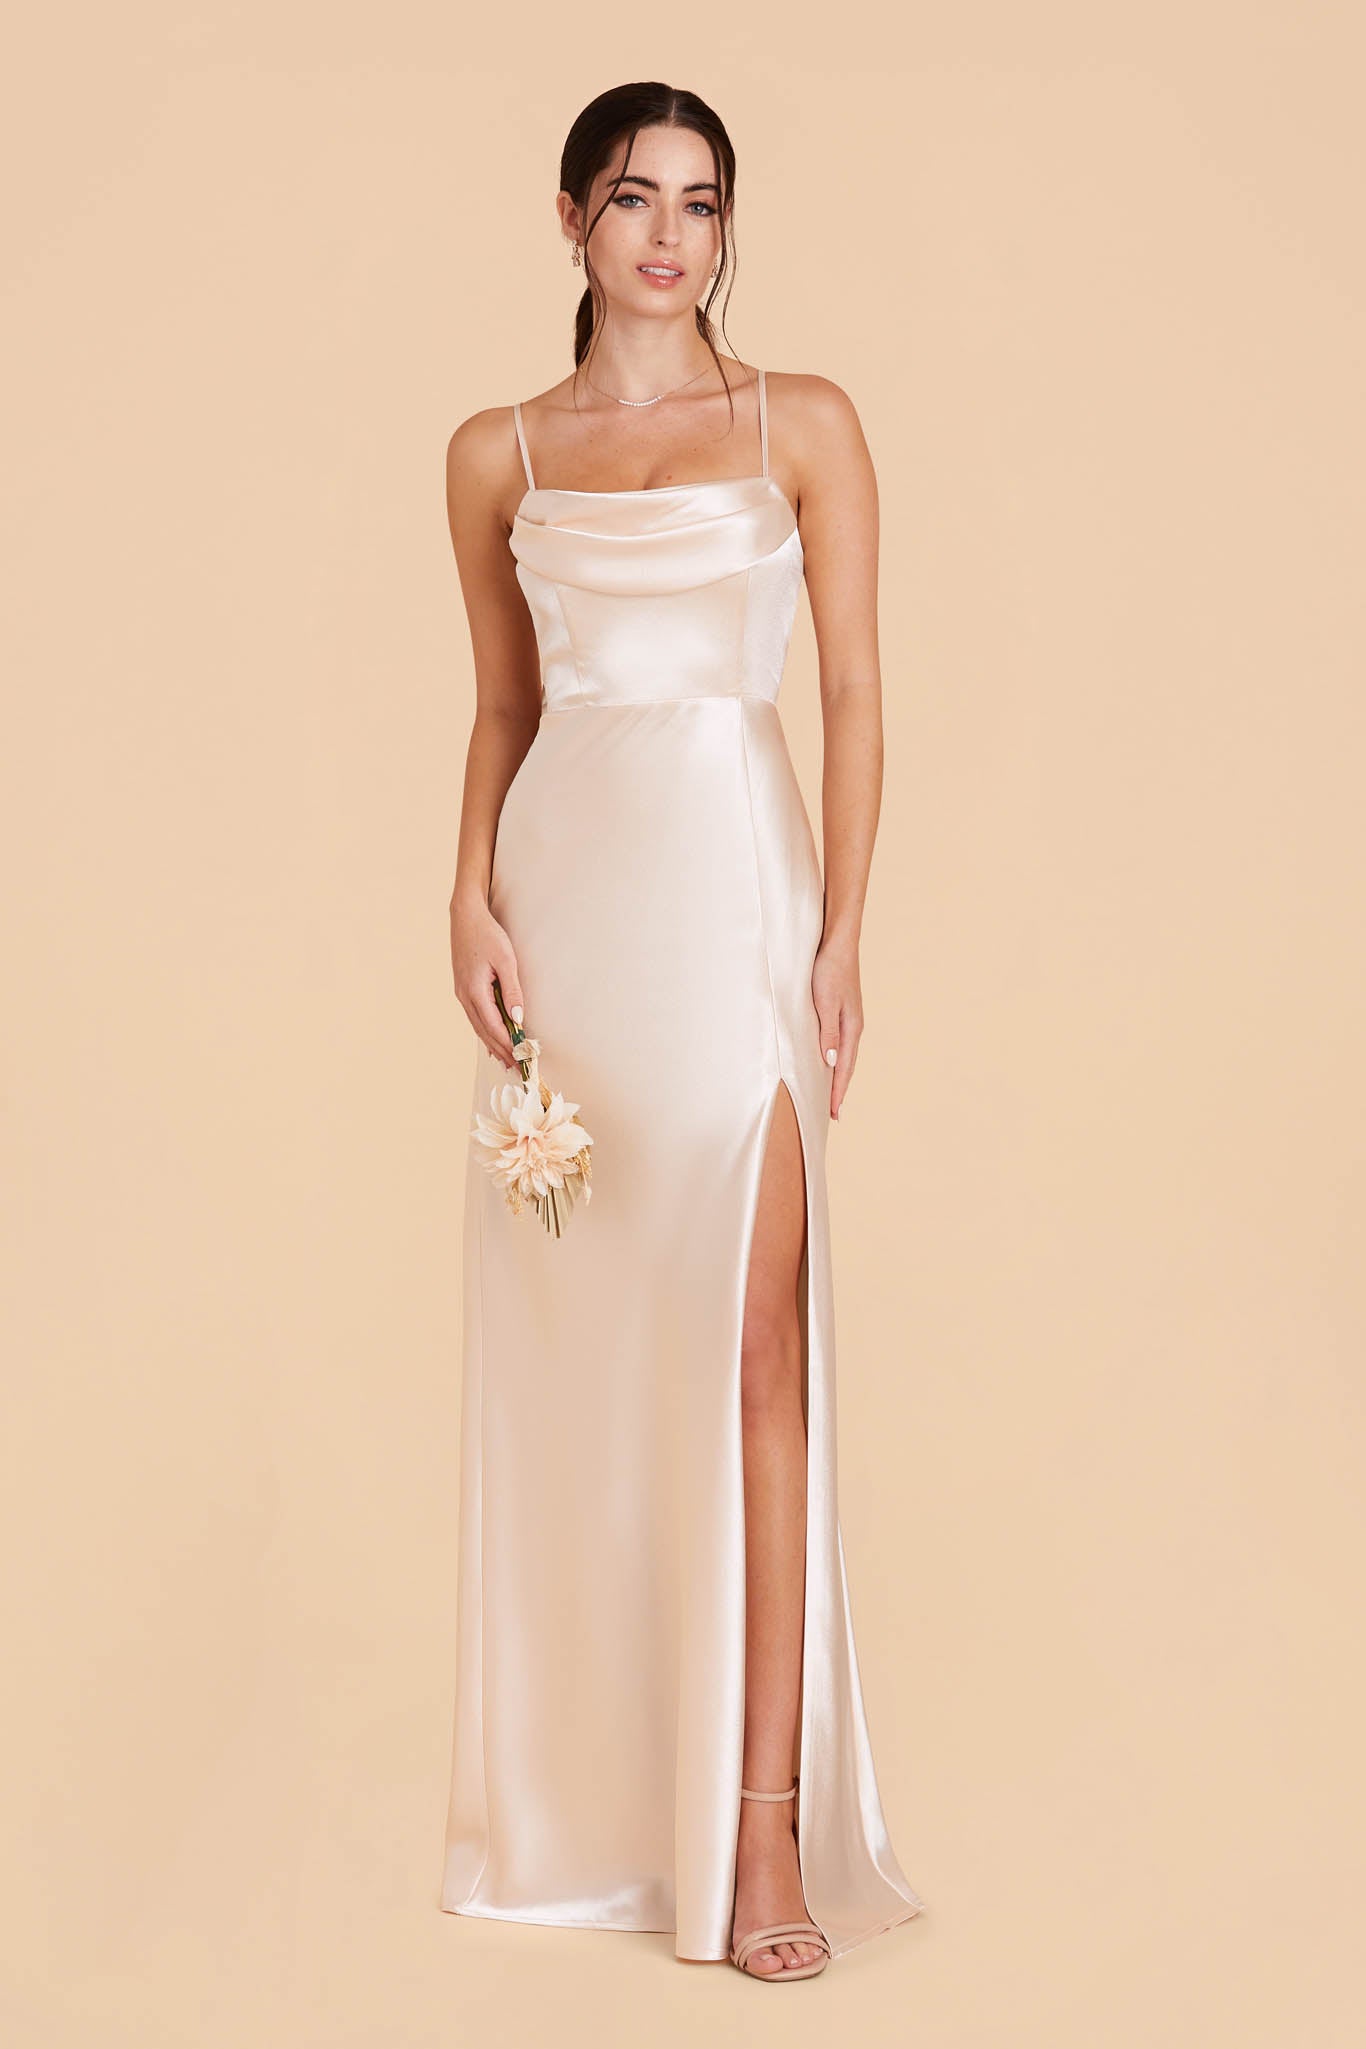 Champagne Mia Convertible Dress by Birdy Grey